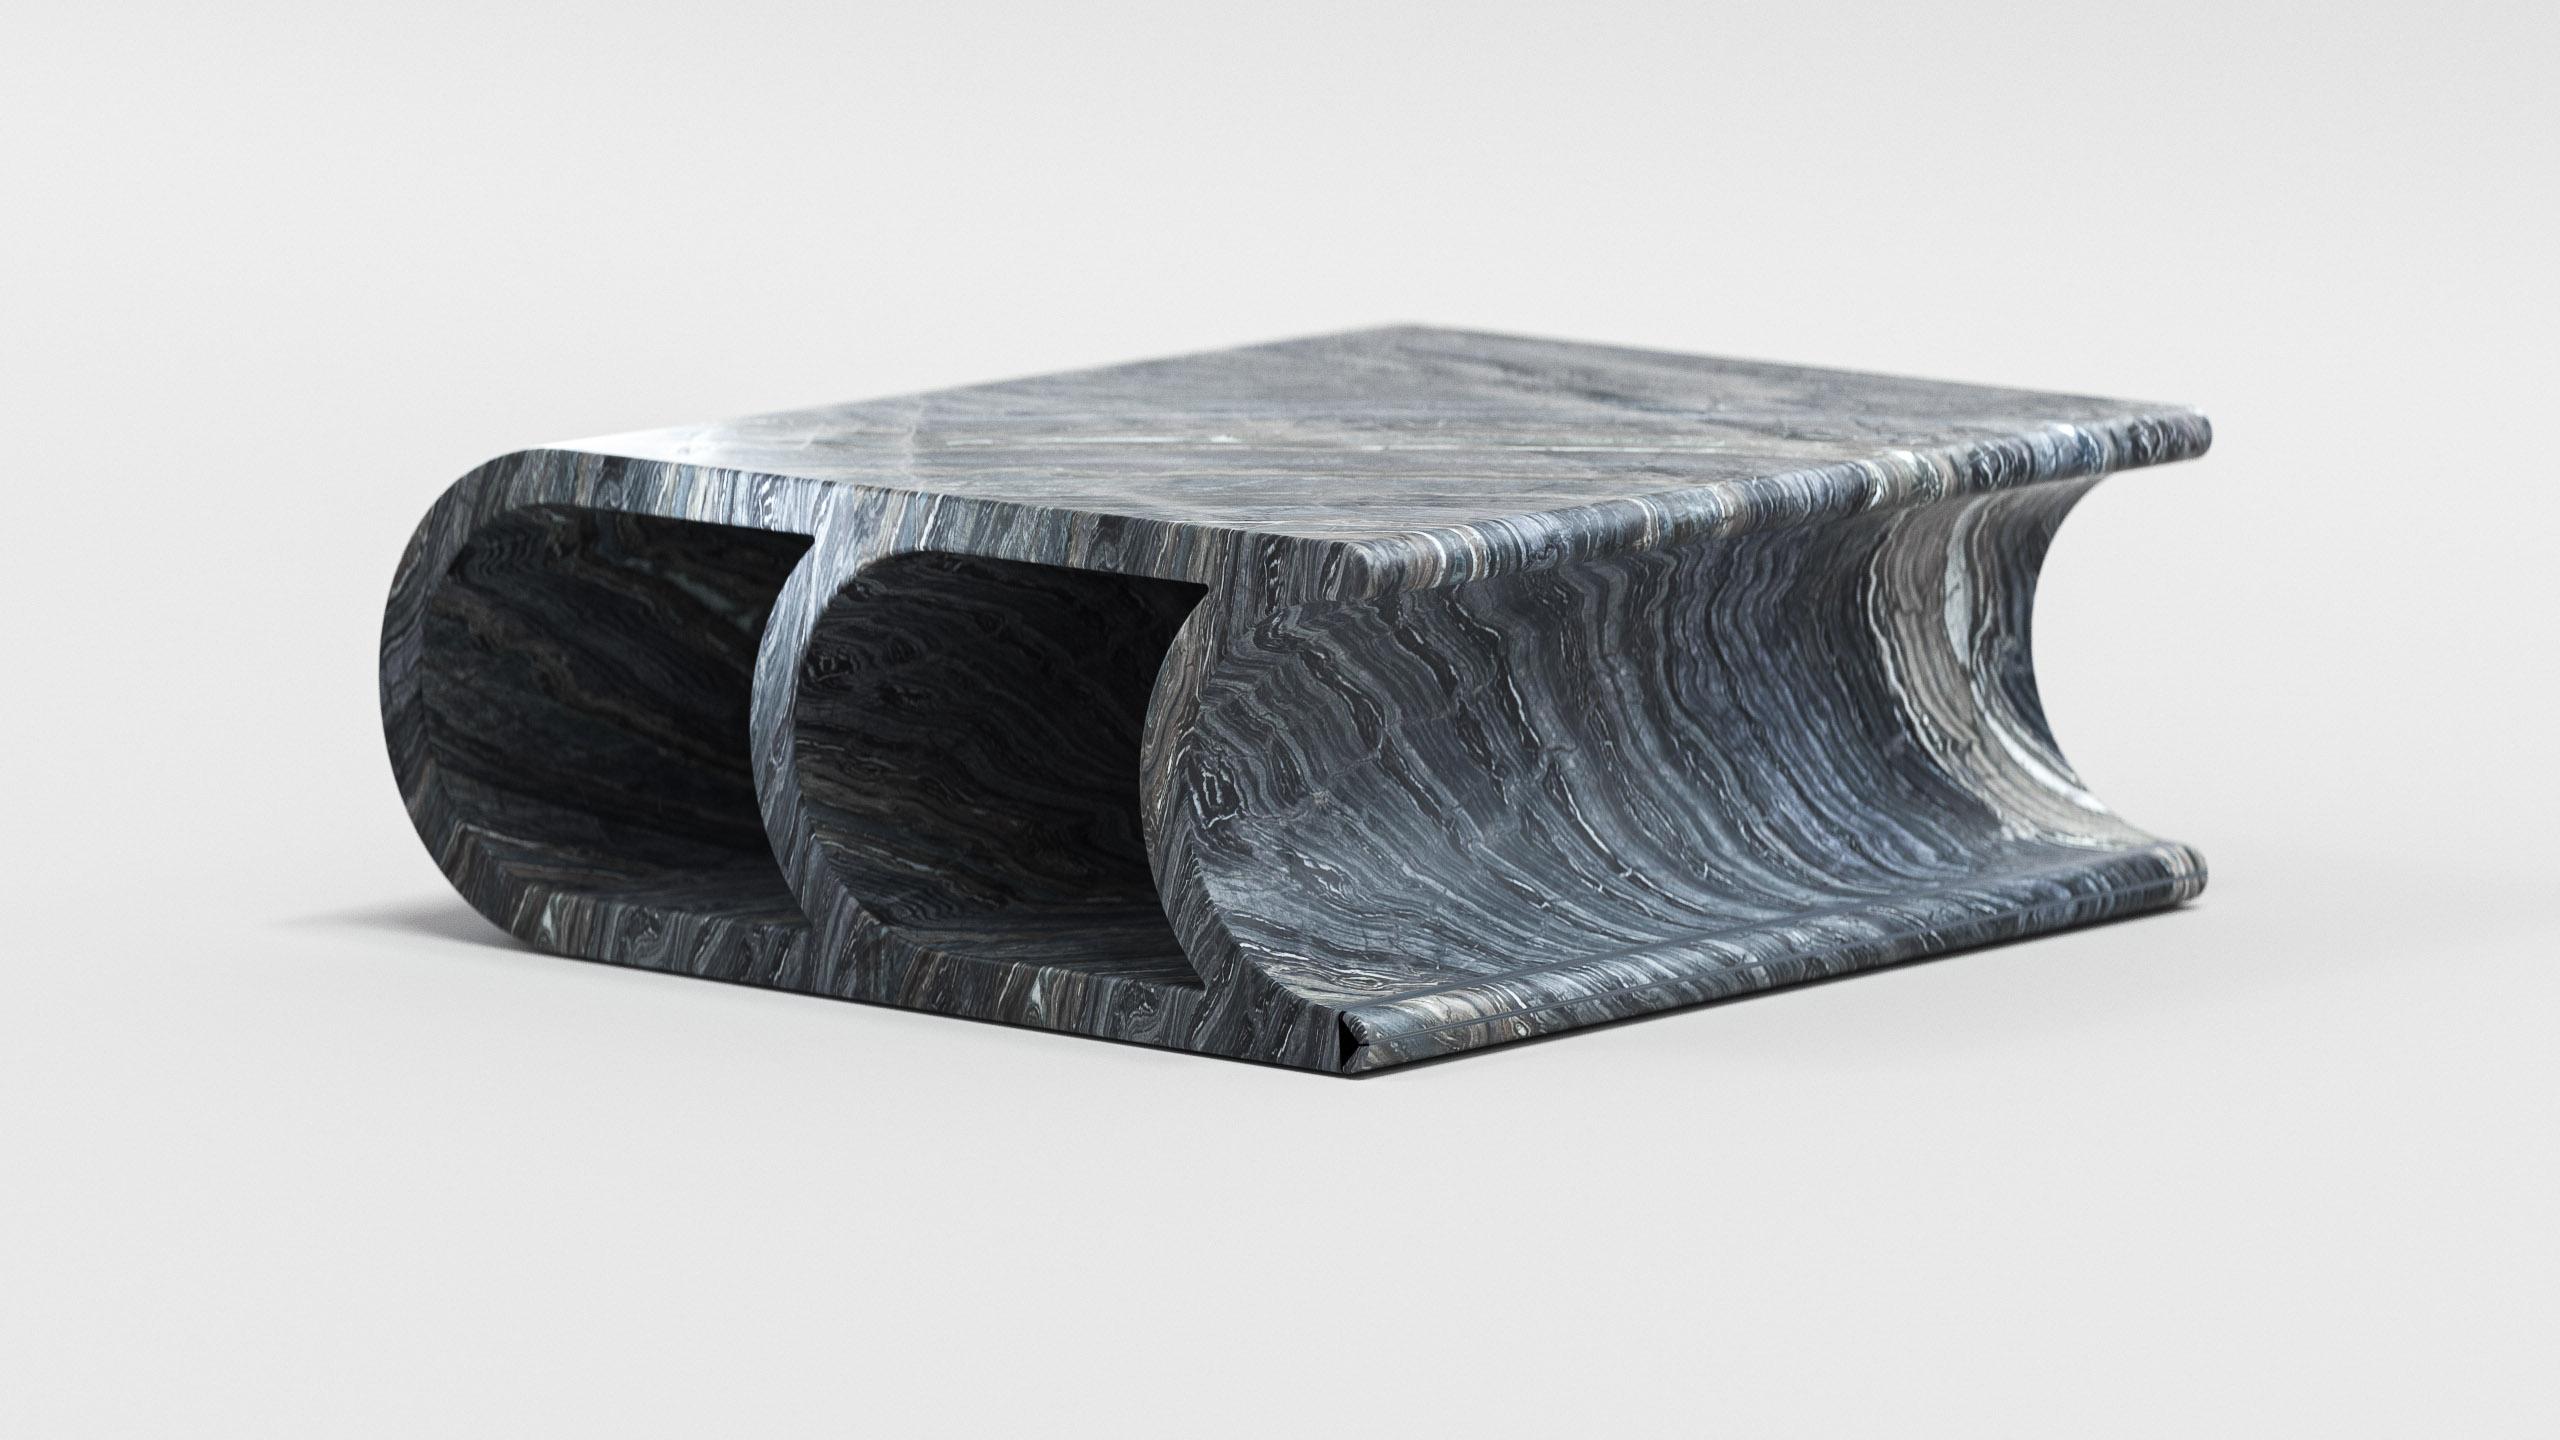 Extrude coffee table by Arthur Vallin
Numbered Edition
Dimensions: W 90 x D 90 x H 35 cm
Materials: Silverwave Marble
Finishing: Un-honed

French Artist, Designer, and Creative Director Arthur Vallin hold a master’s degree in Art Direction